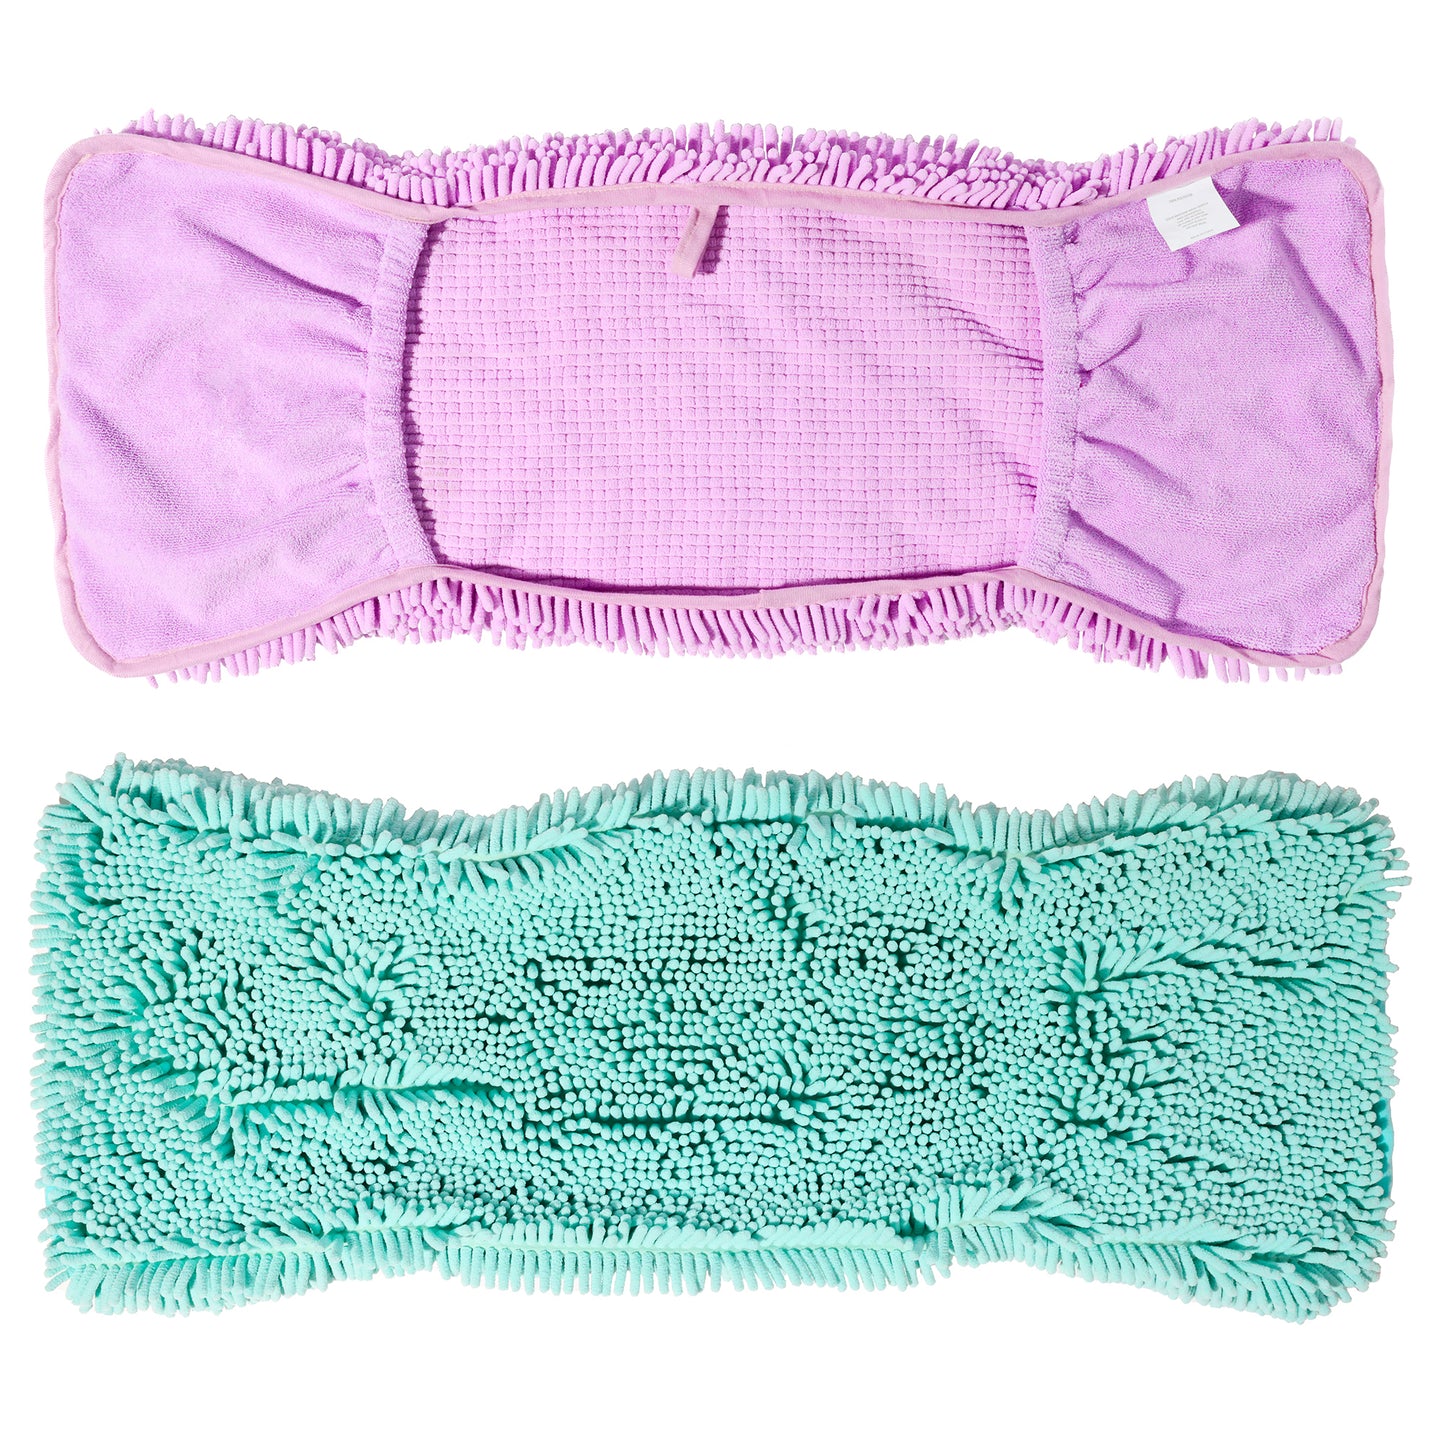 2 Pack Luxury Absorbent Dog Towels, (35"x15") Extra Large Microfiber Quick Drying Dog Shammy with Hand Pockets Pet Towel for Dog and Cat, Machine Washable (Lilac+Aqua)